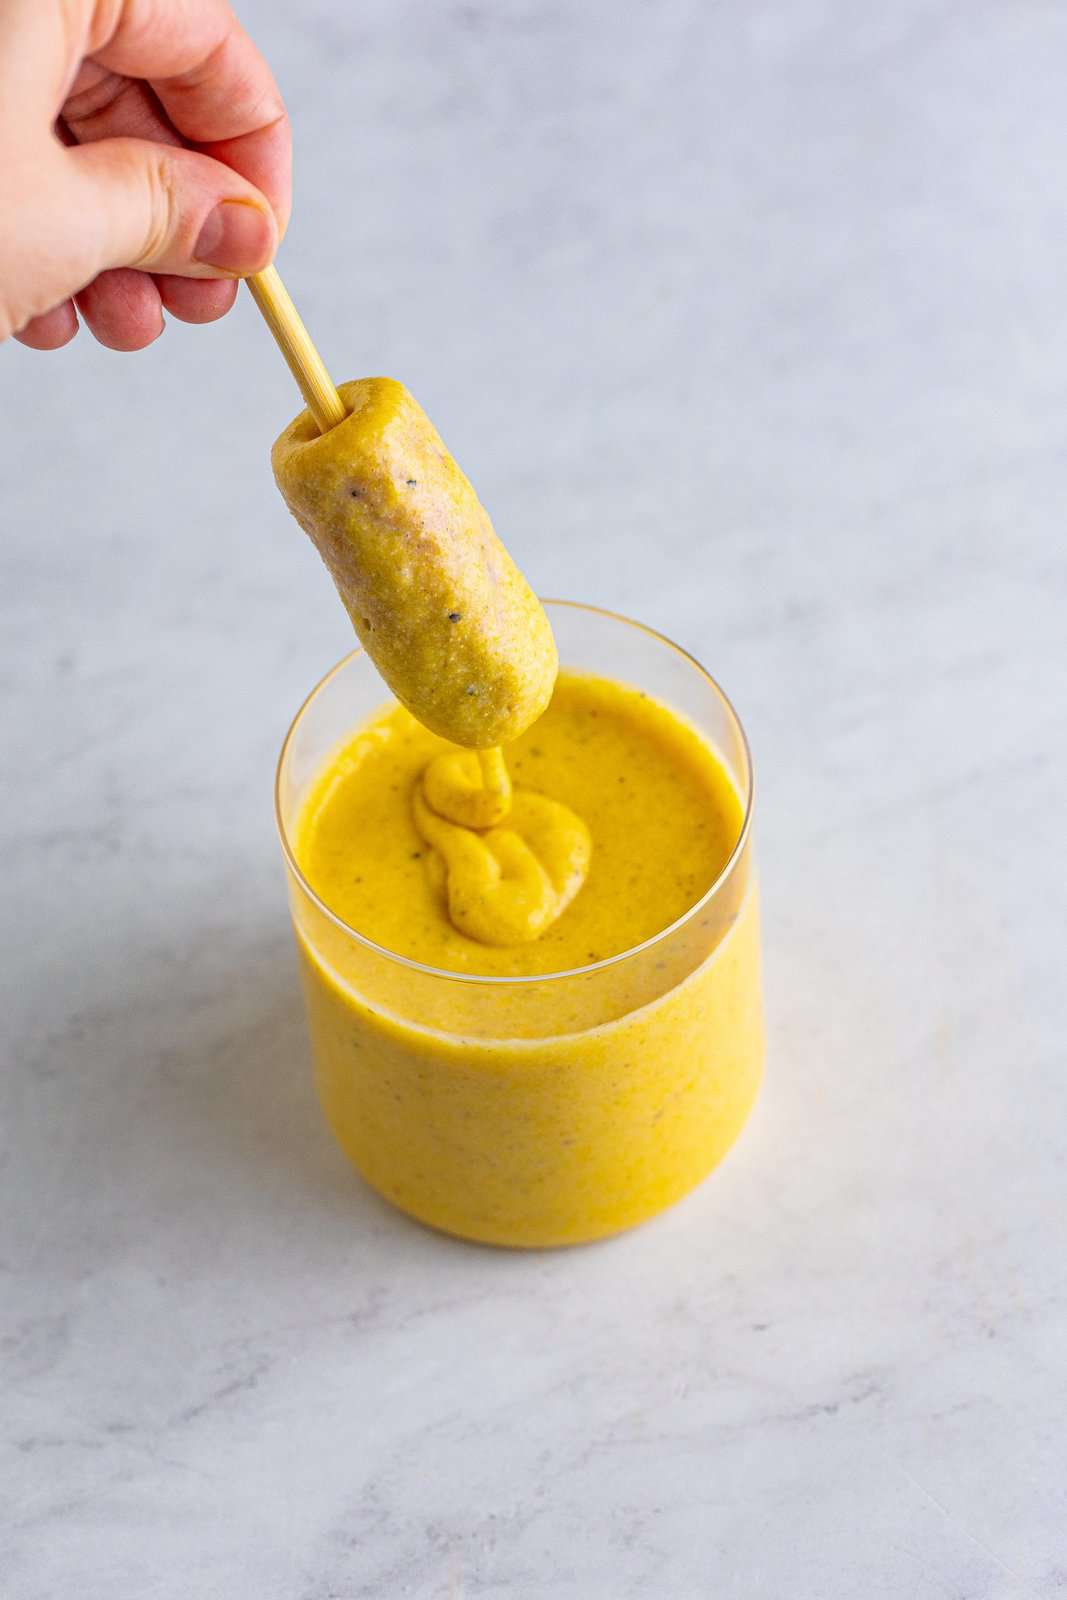 Corn dog dipped into batter in cup.